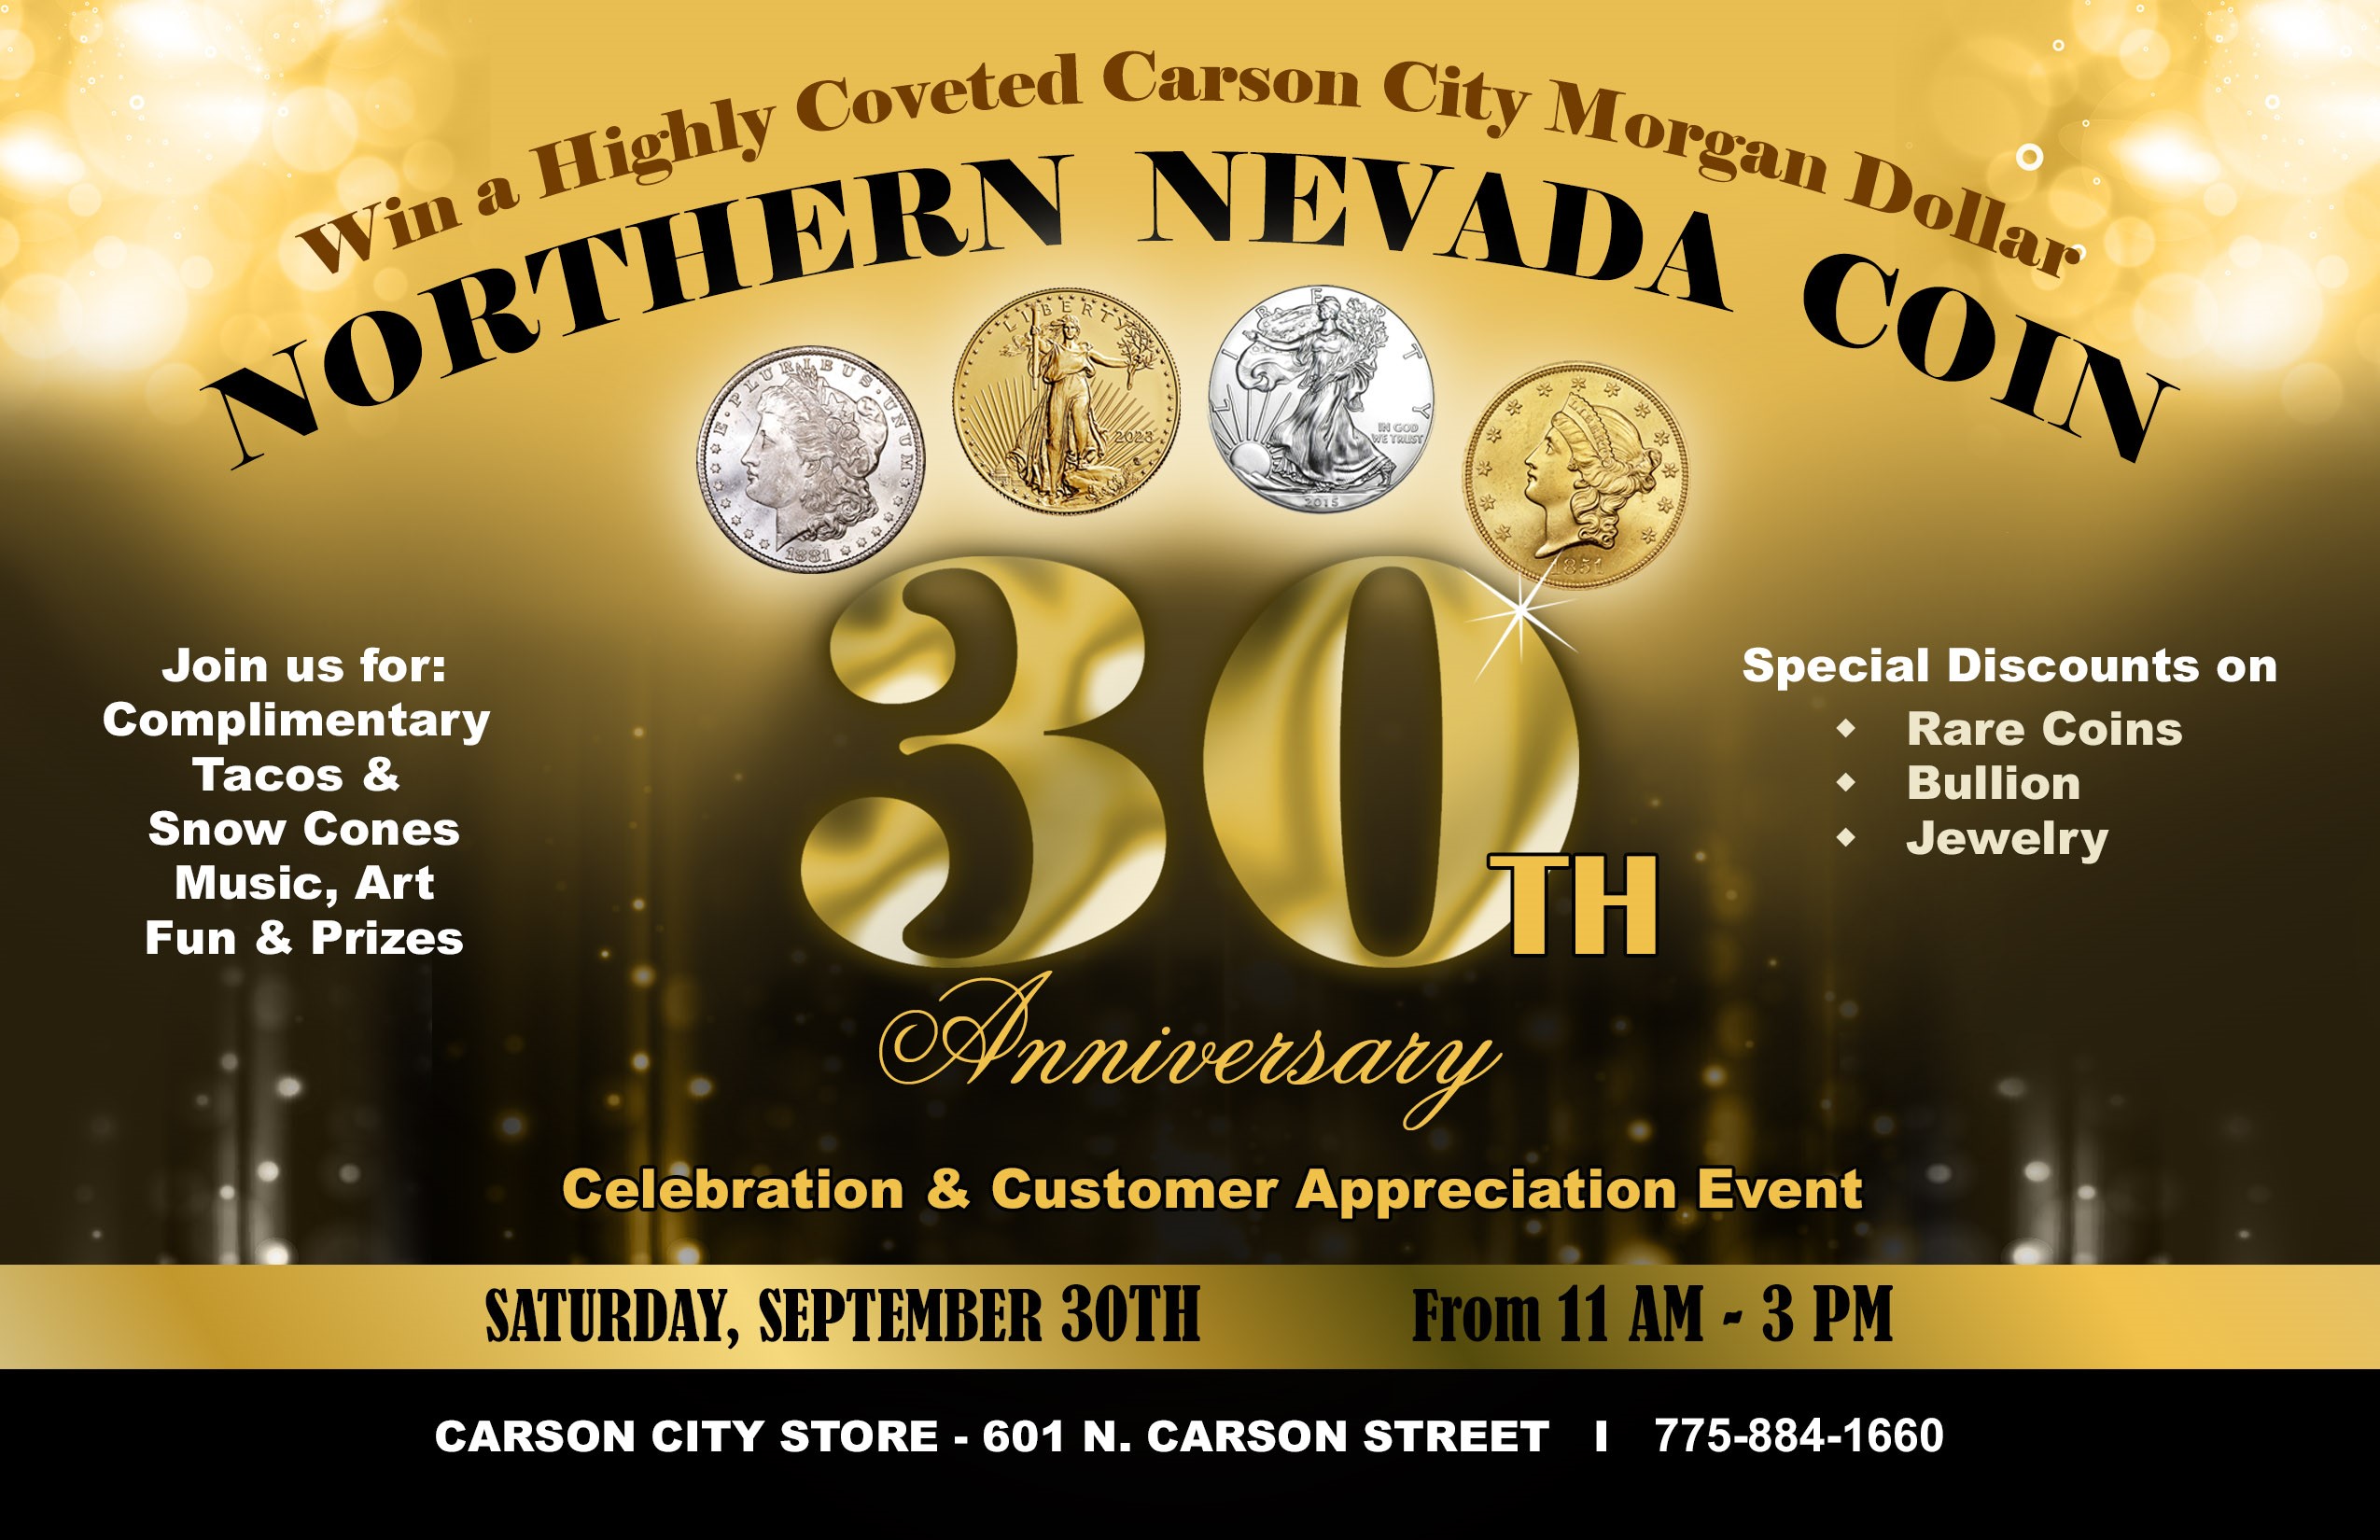 Northern Nevada Coin named ‘Most Influential Company’ | Serving Northern Nevada